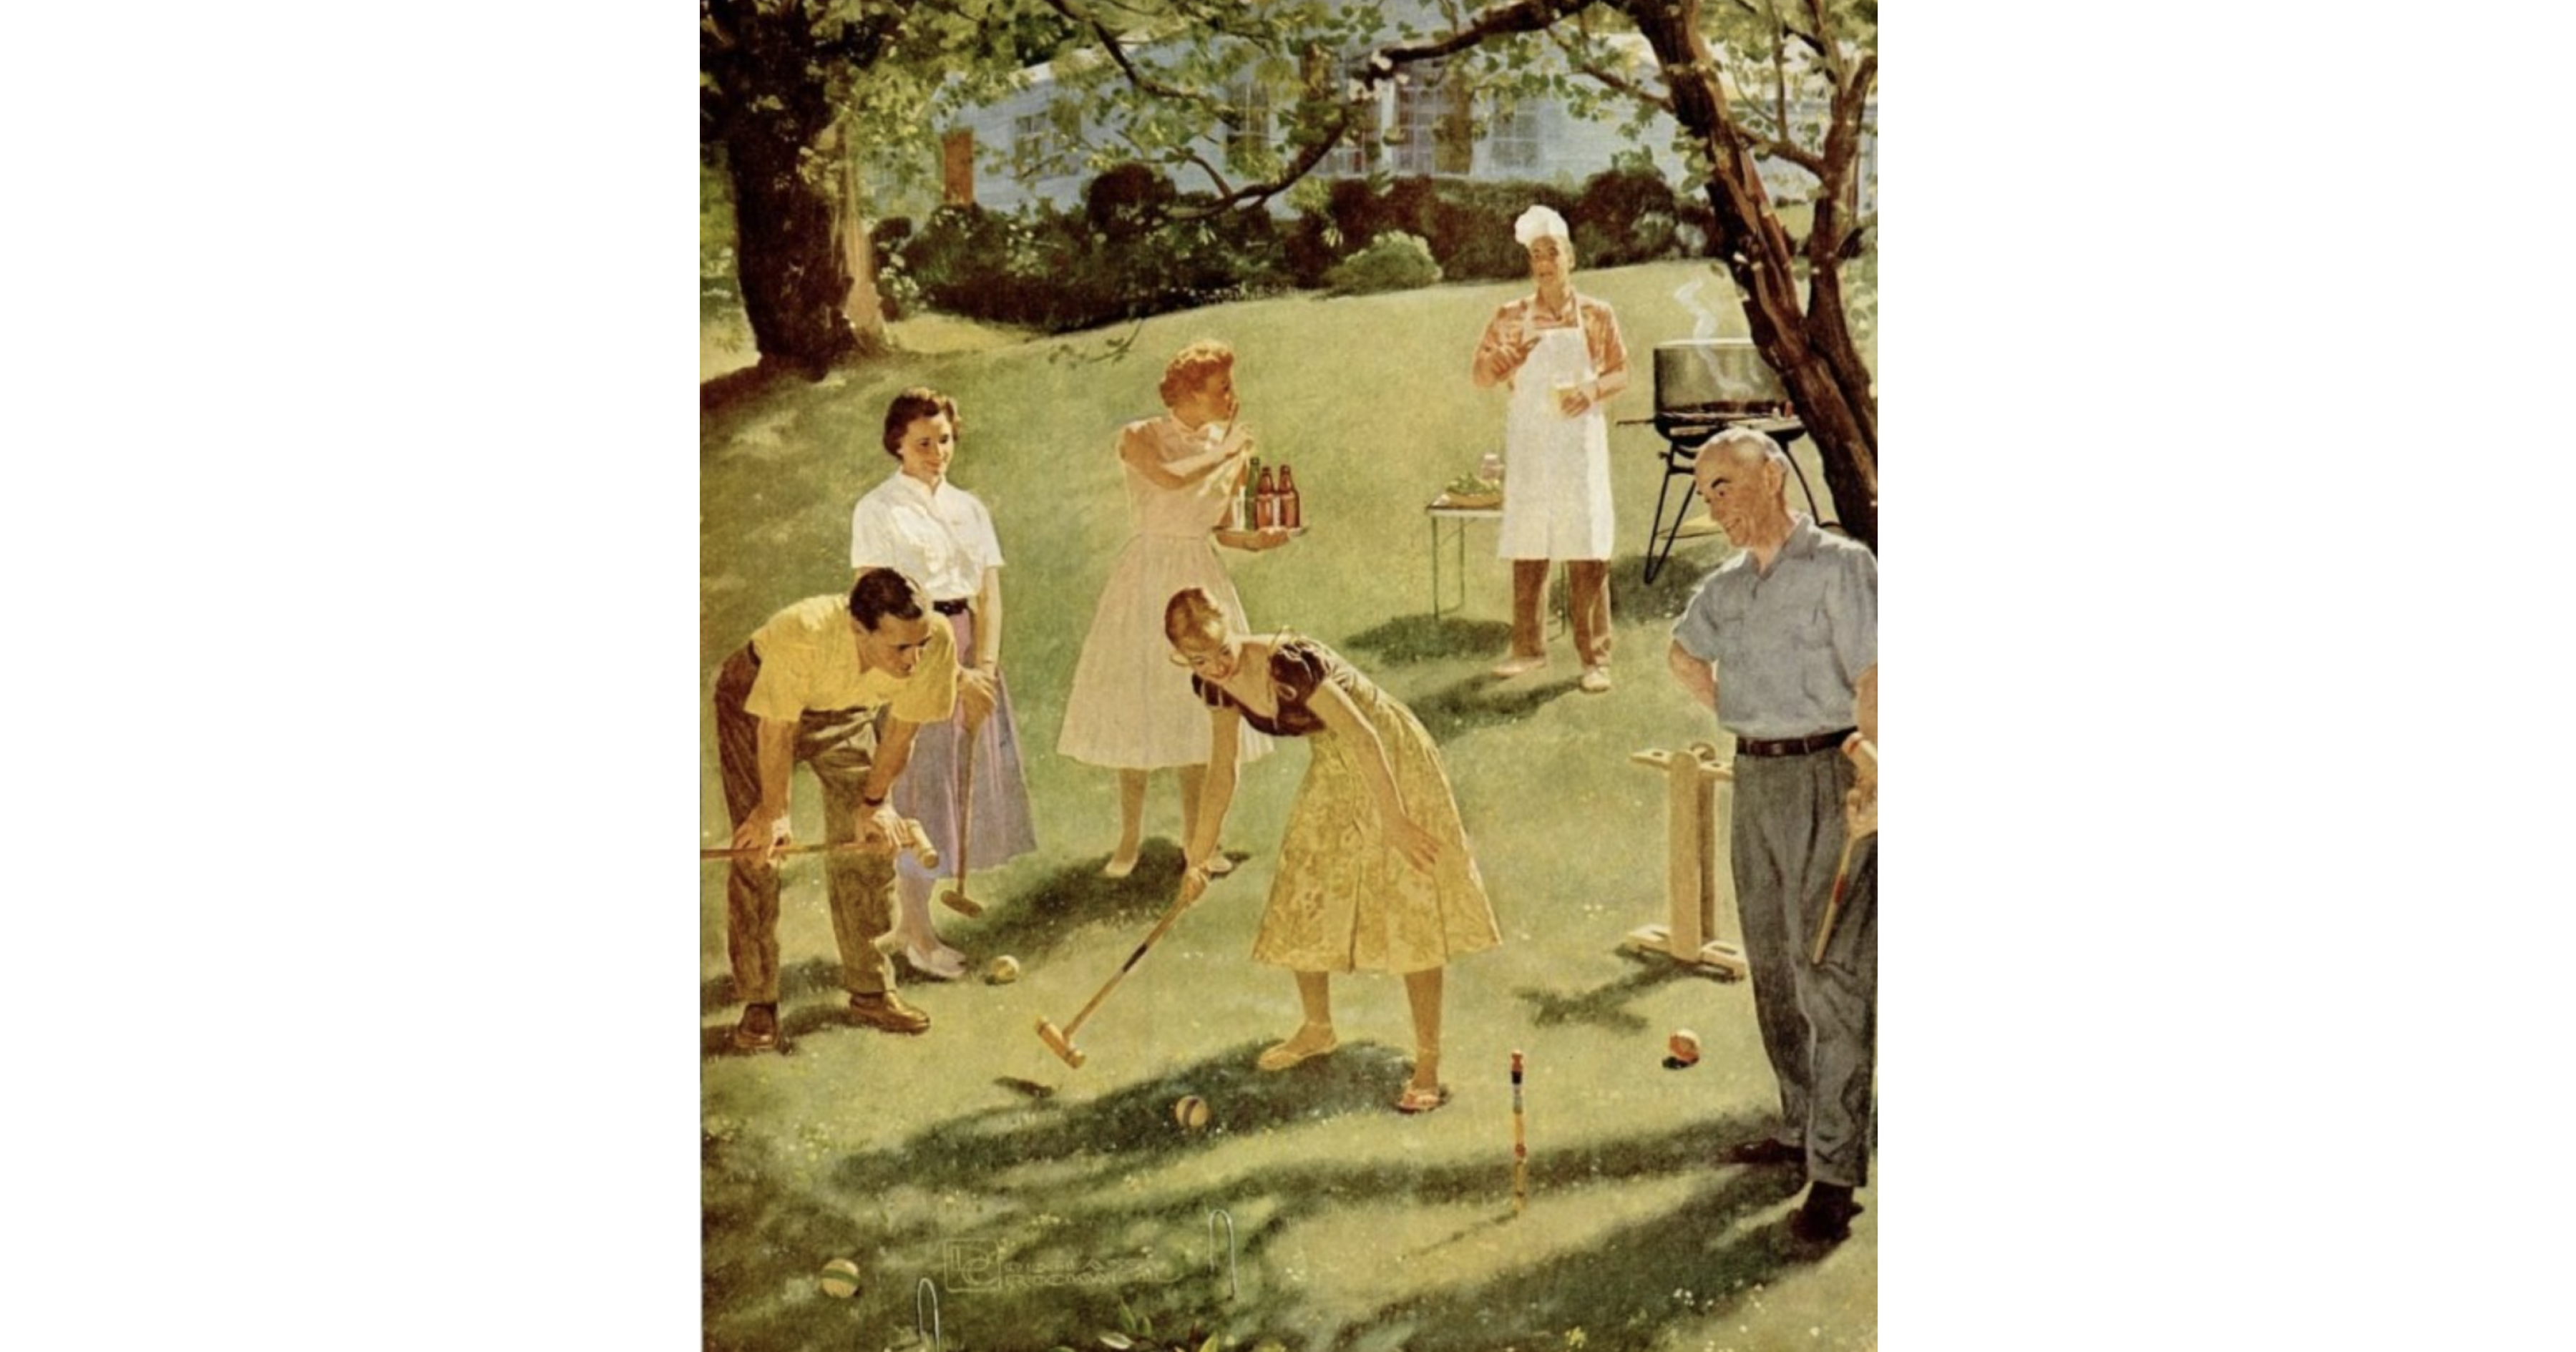 Six people at a barbecue playing croquet 